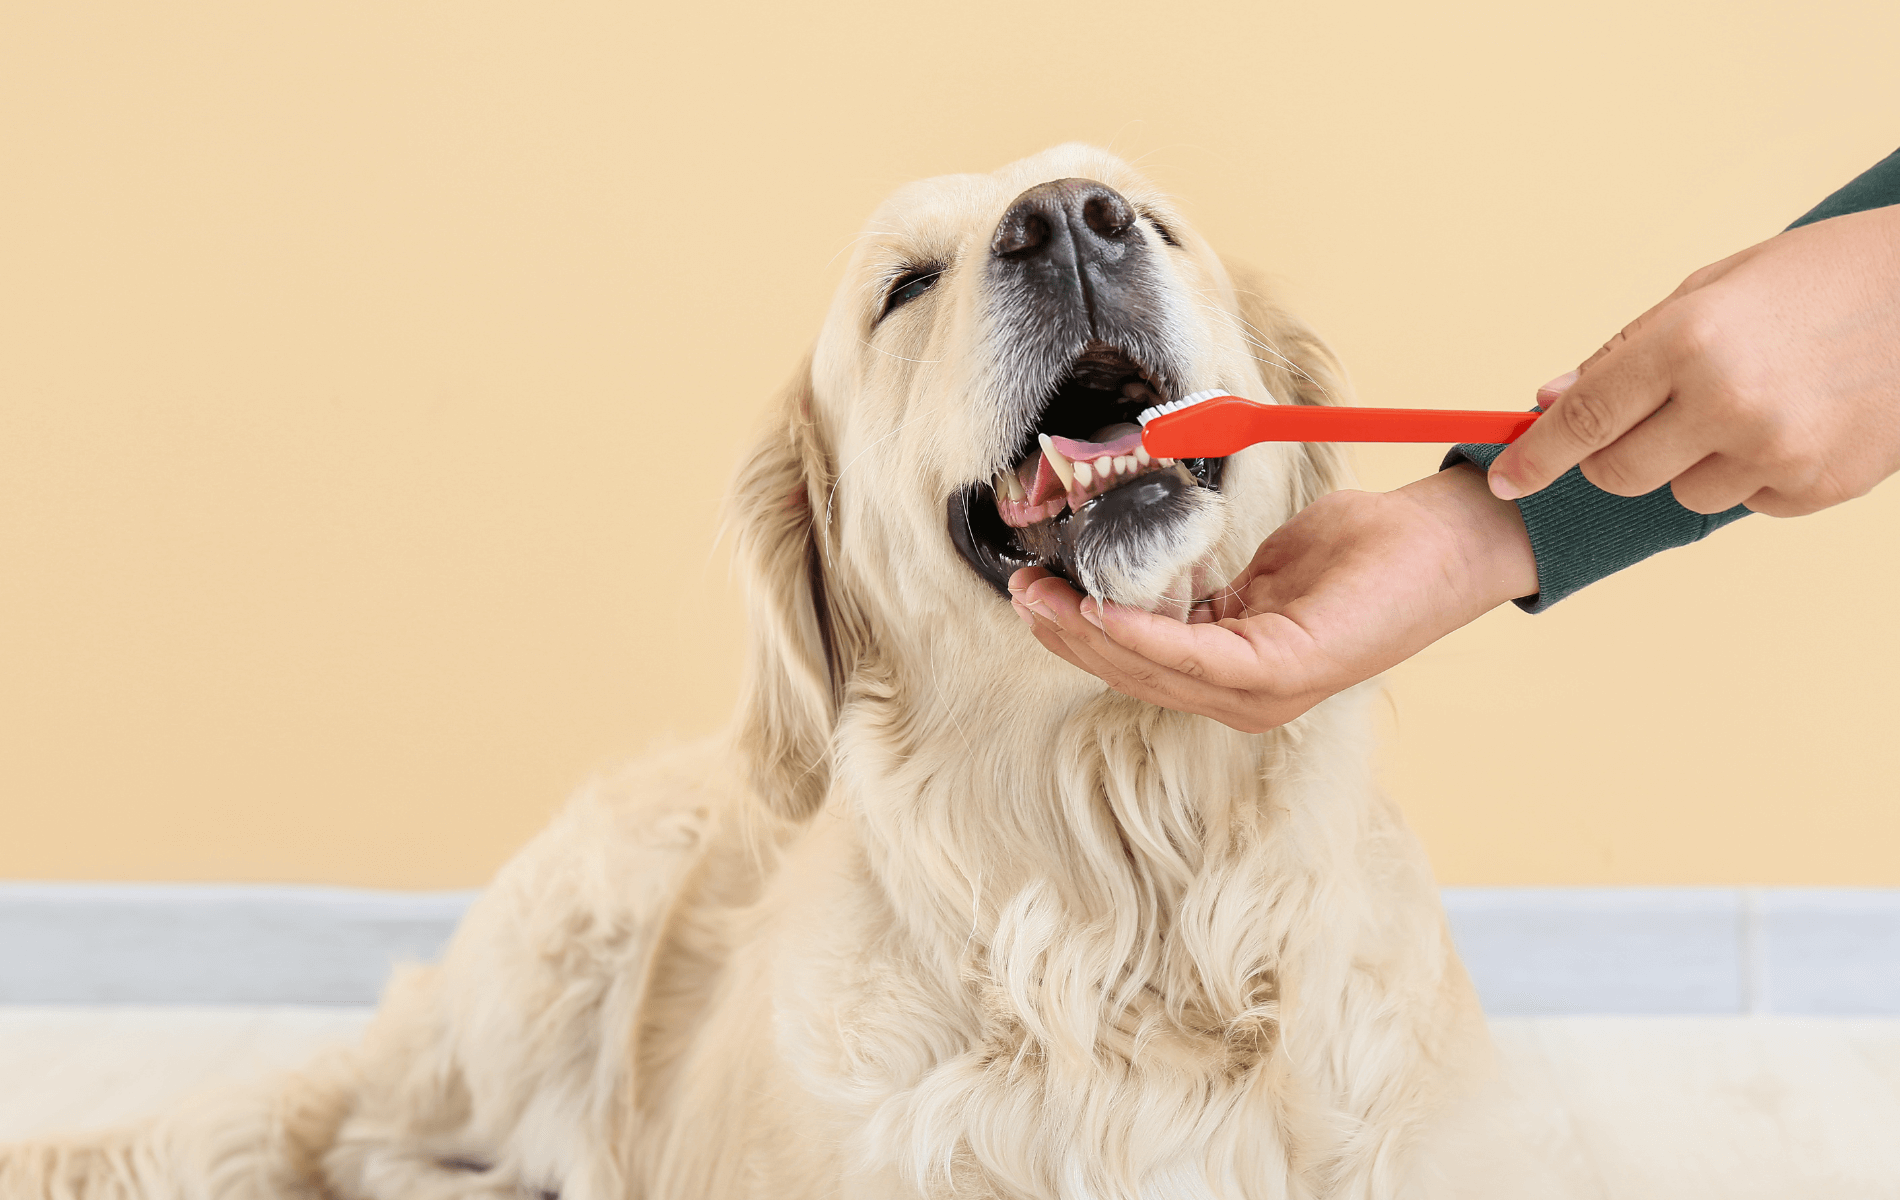 A dog being brushed by a person